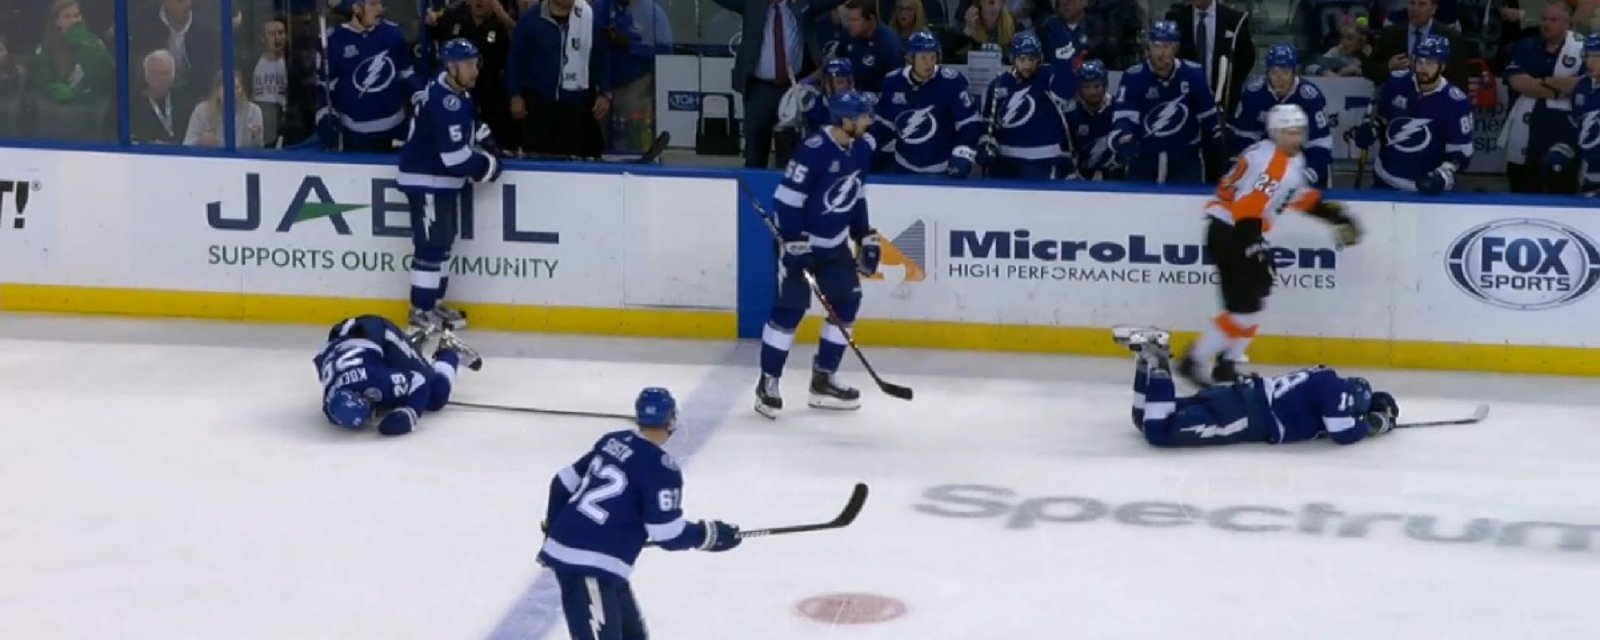 Weise clothlines two lightning players at the same time, takes a hilarious penalty. 